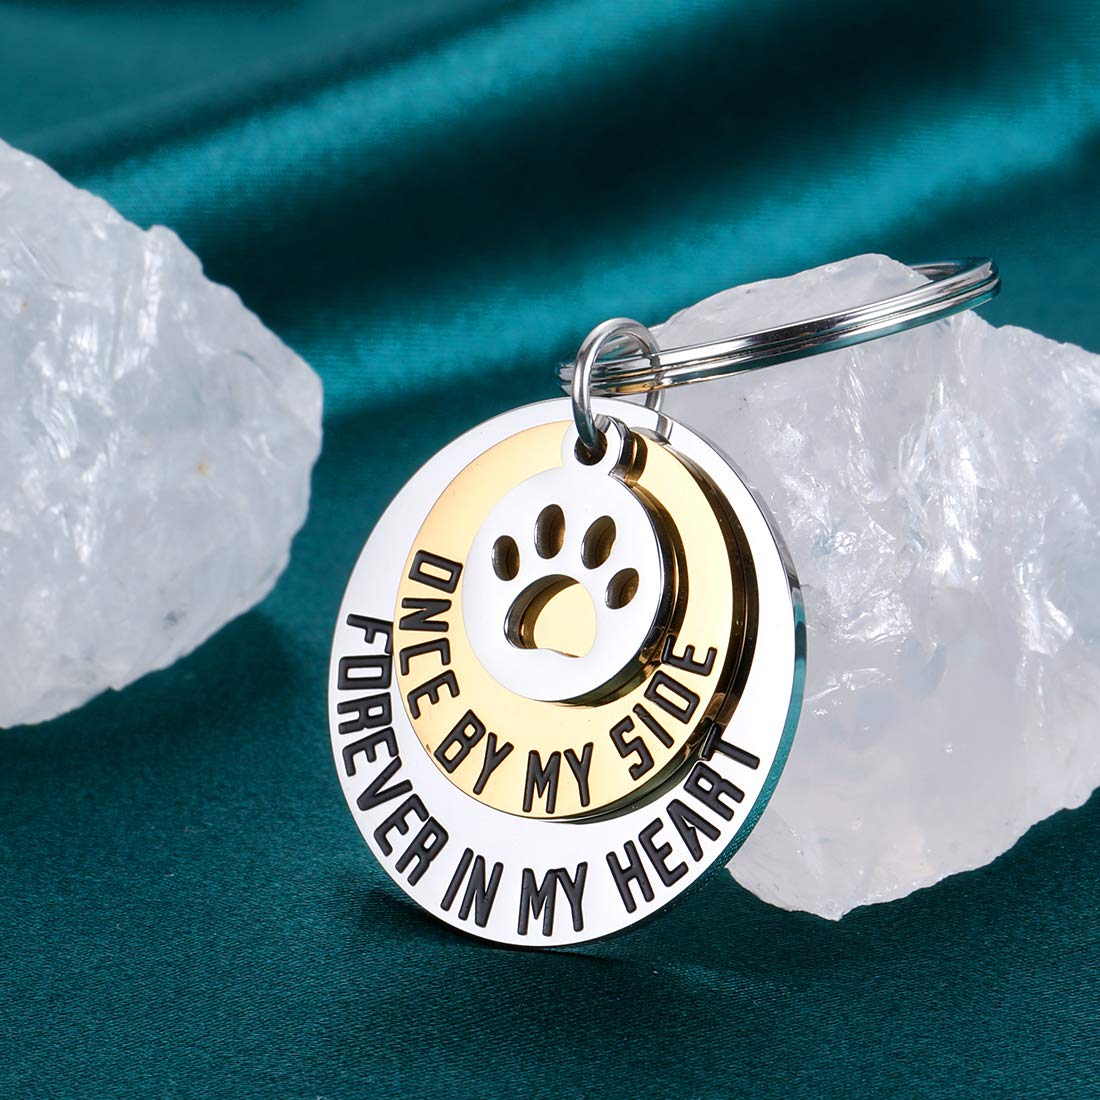 Dog Cat Pet Memorial Gifts Keychain for Pet Lover Remembrance Jewelry Gifts for Loss of Pet Sympathy Condolences Gifts Dog Remembrance Gifts Men Women Pet Owner Once by My Side Pet Keepsake Key Ring